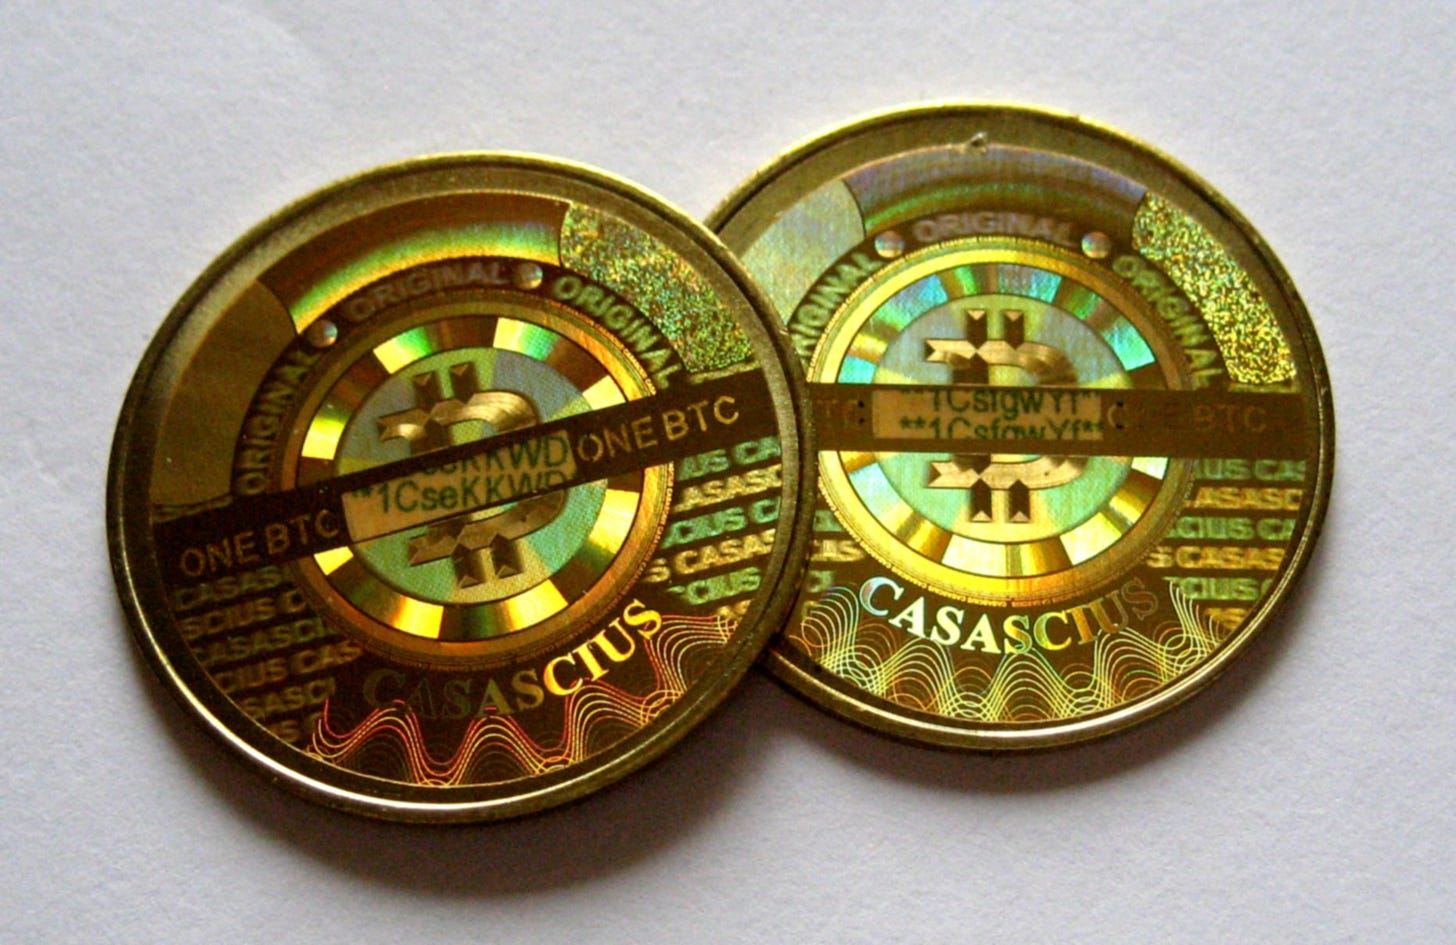 Meet Casascius: the physical Bitcoins with a real value